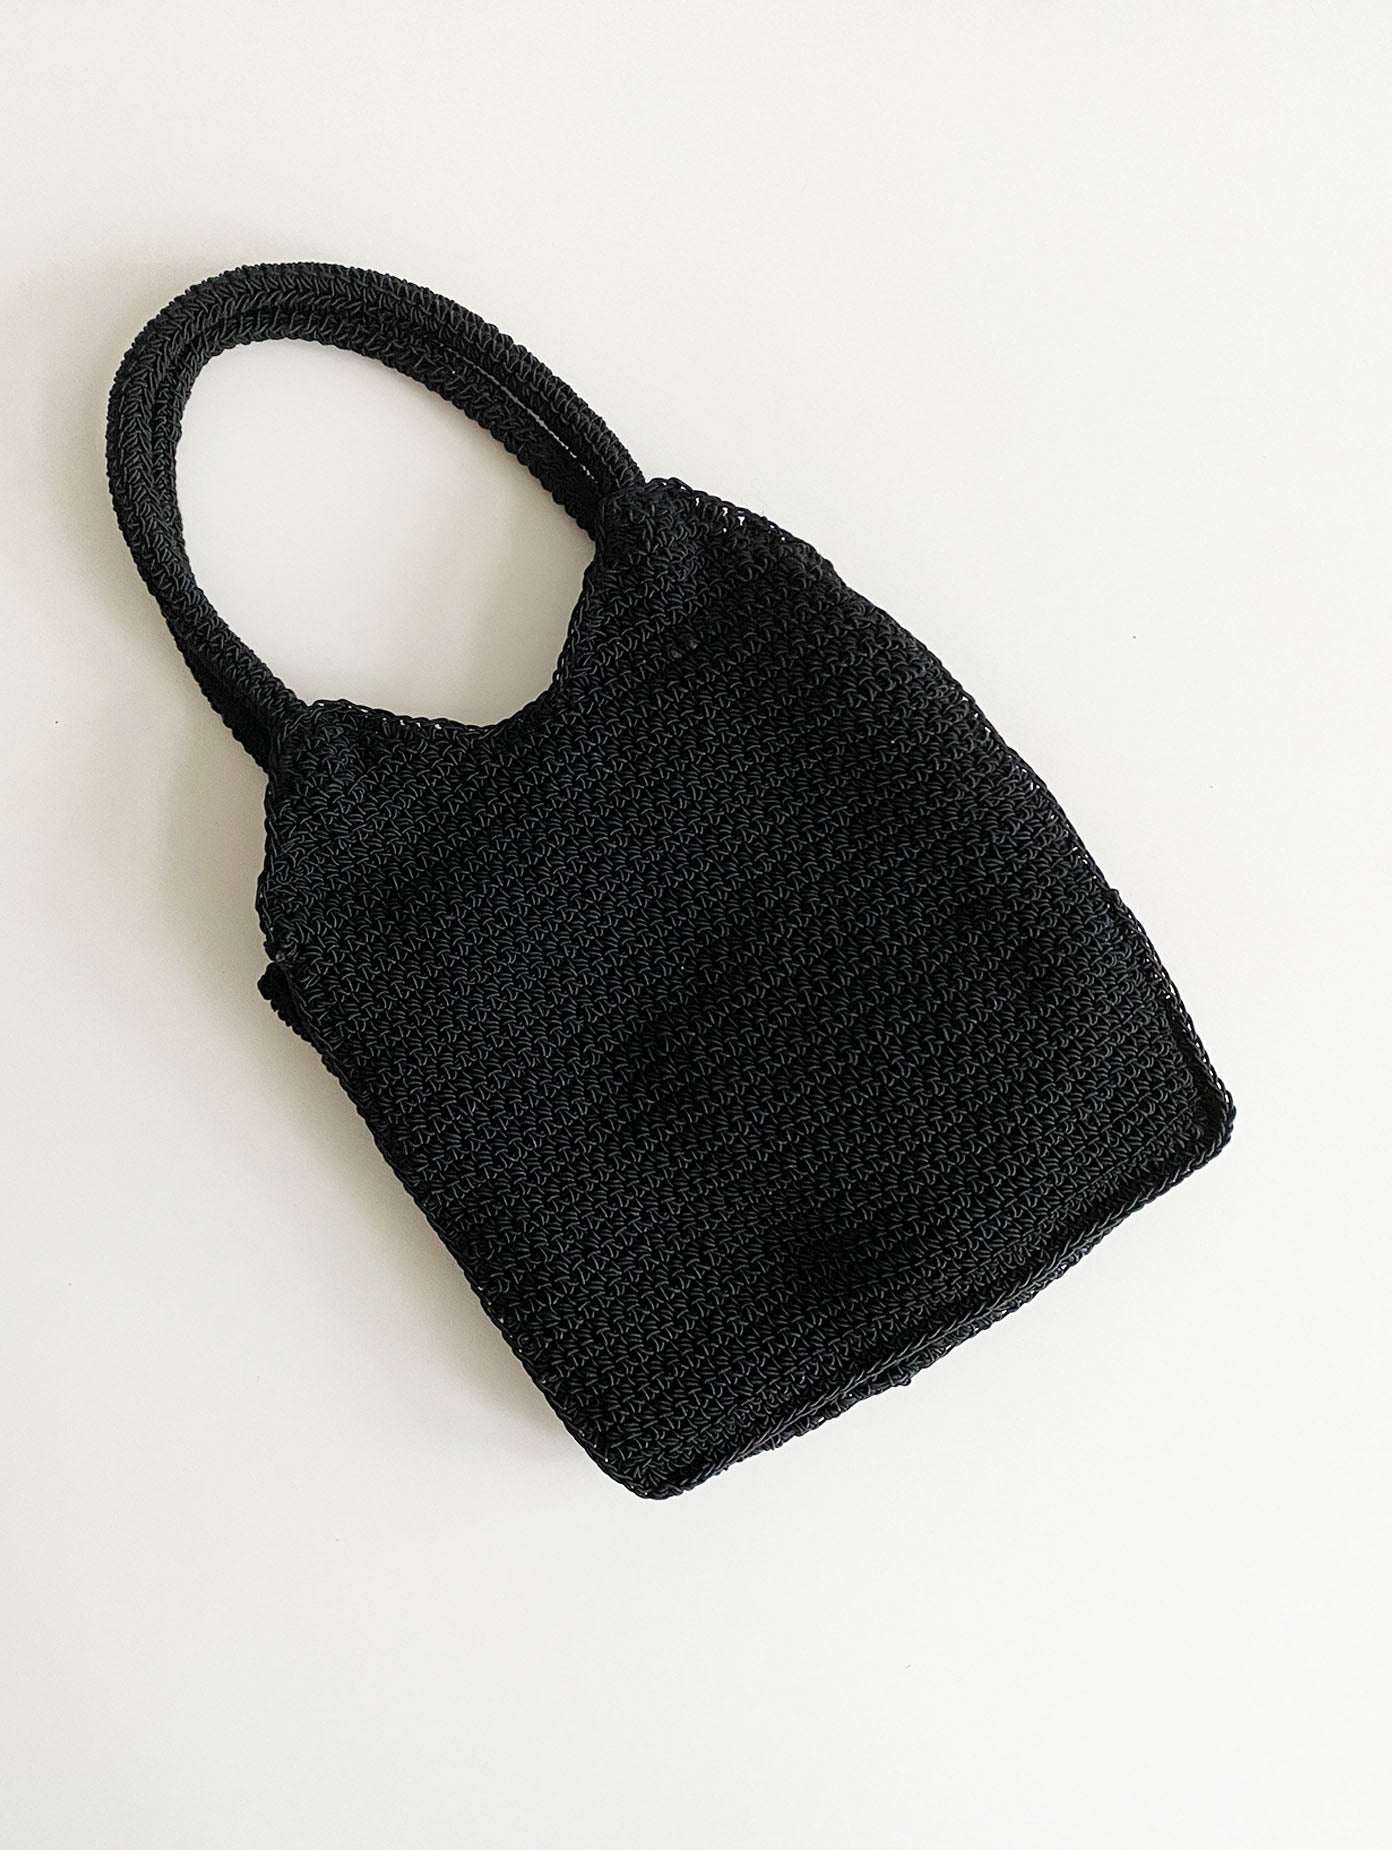 Black and Gray Flower Knit Bag With Coin Purse